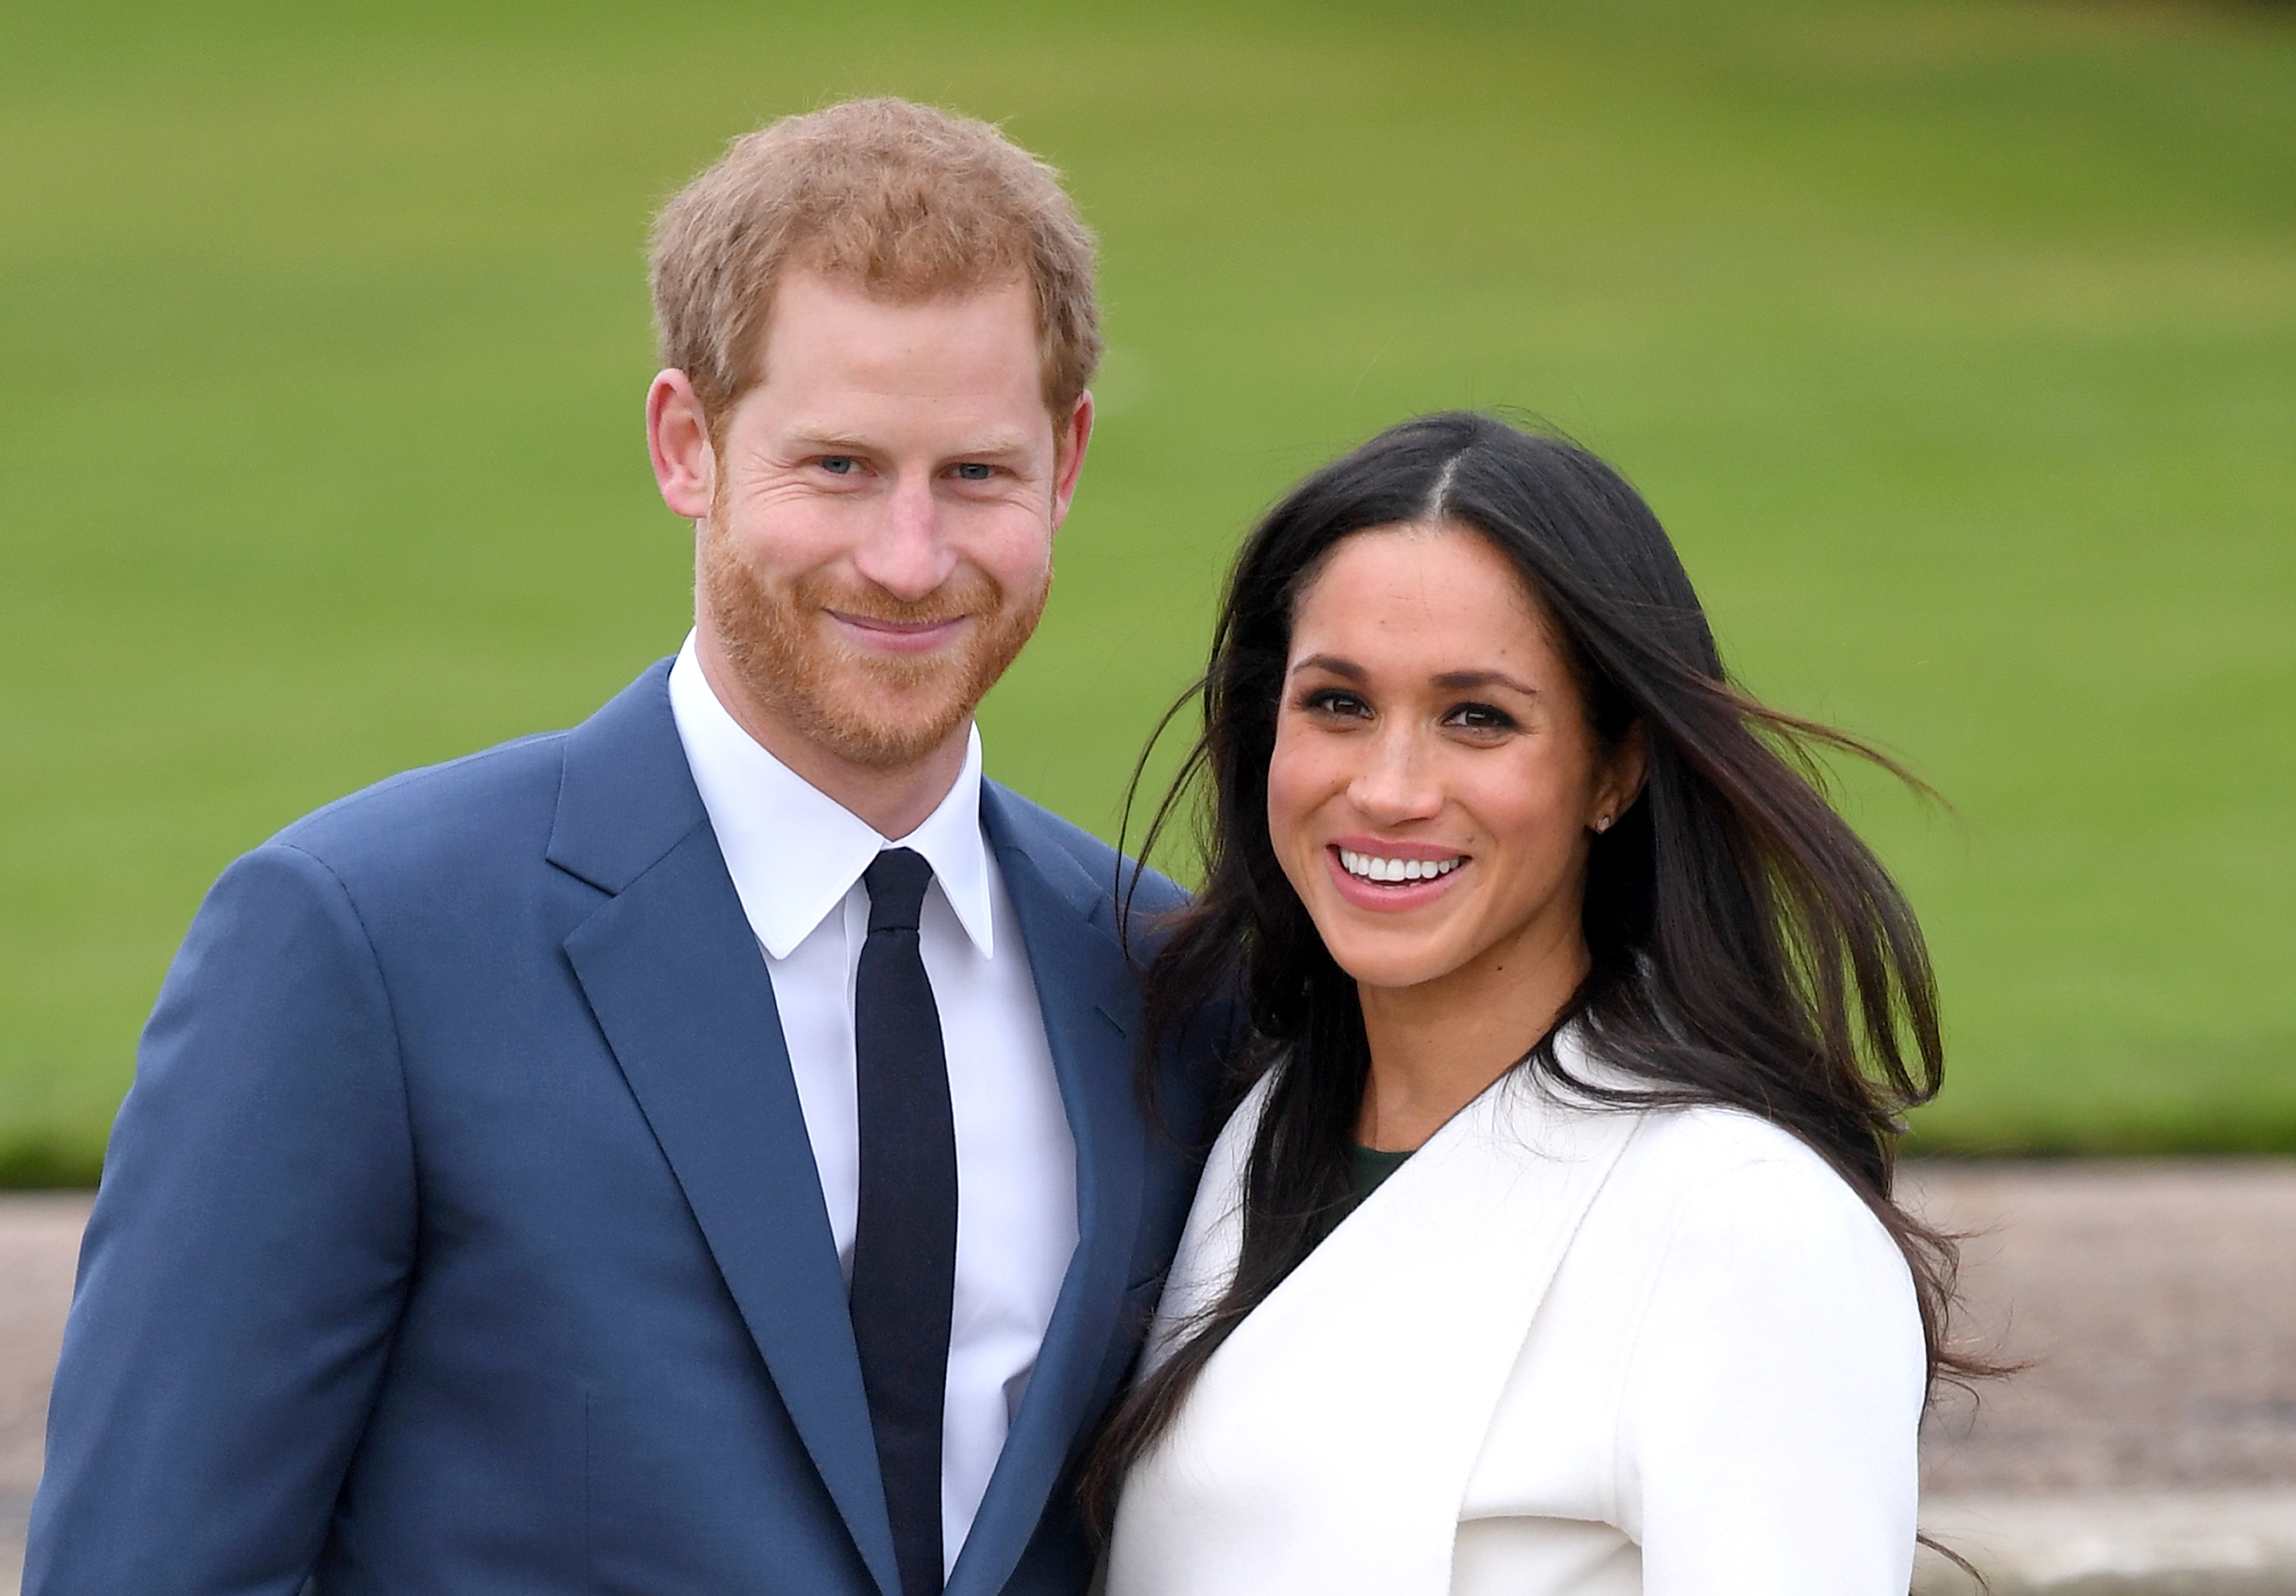 Meghan Markle and Prince Harry pose for pictures after announcing their engagement.